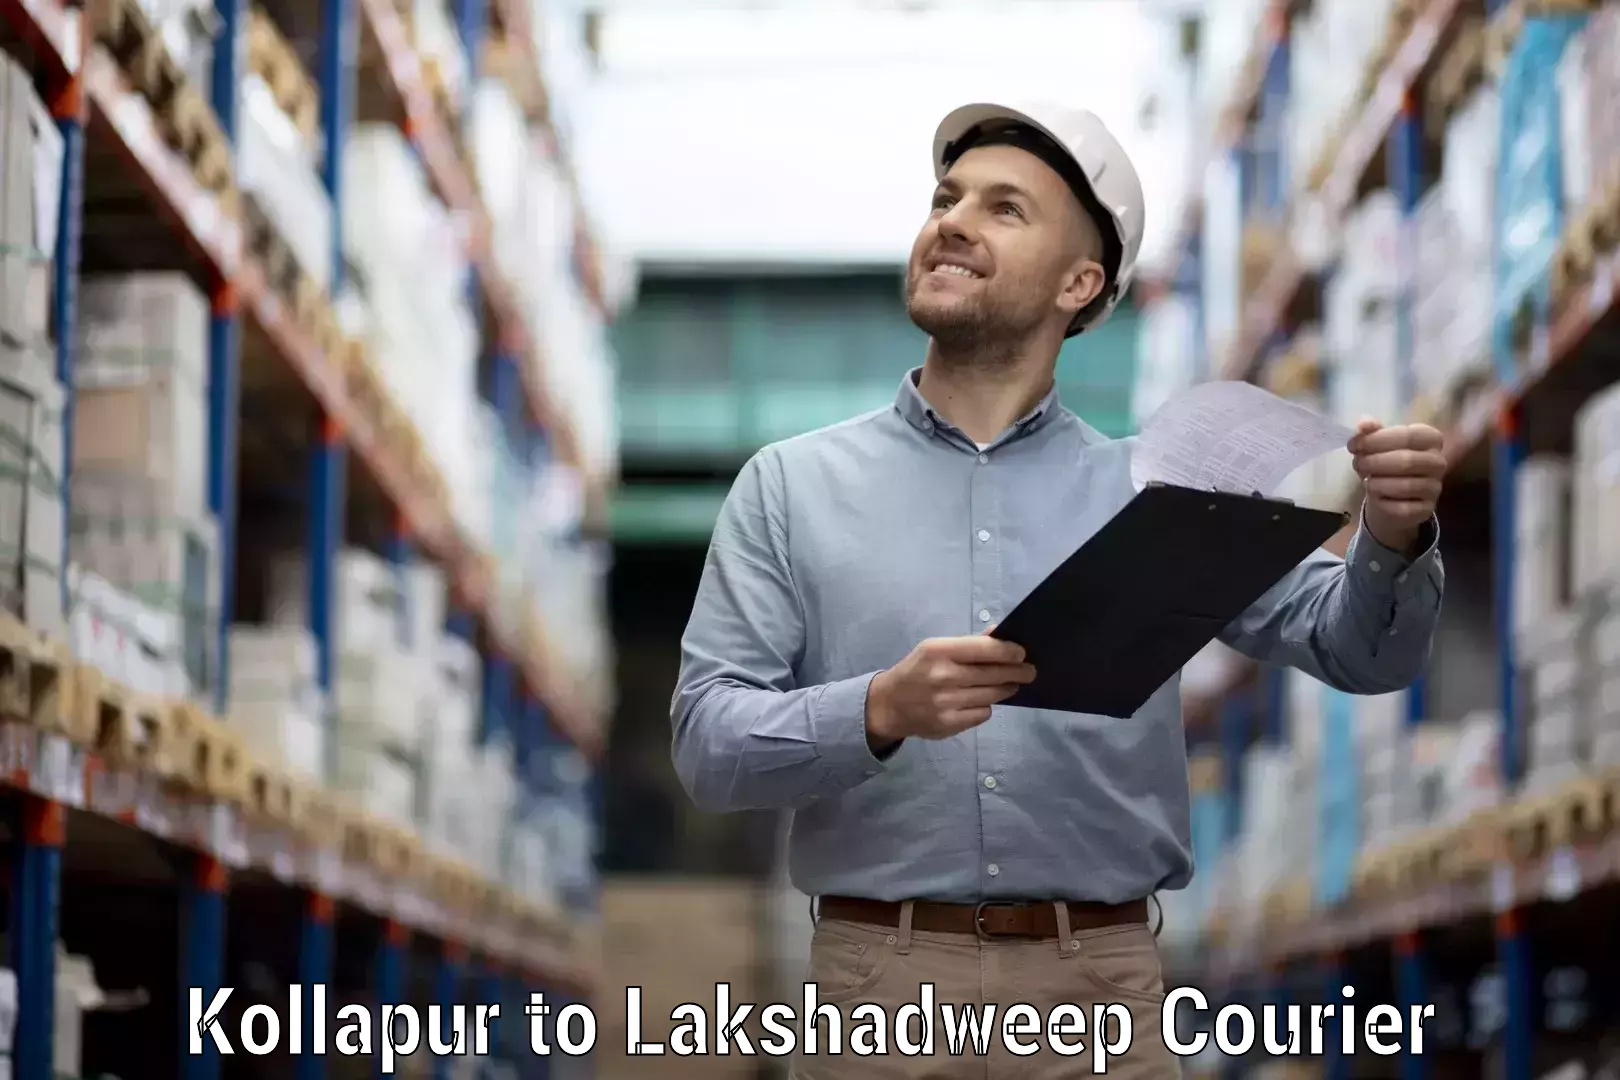 Multi-national courier services Kollapur to Lakshadweep